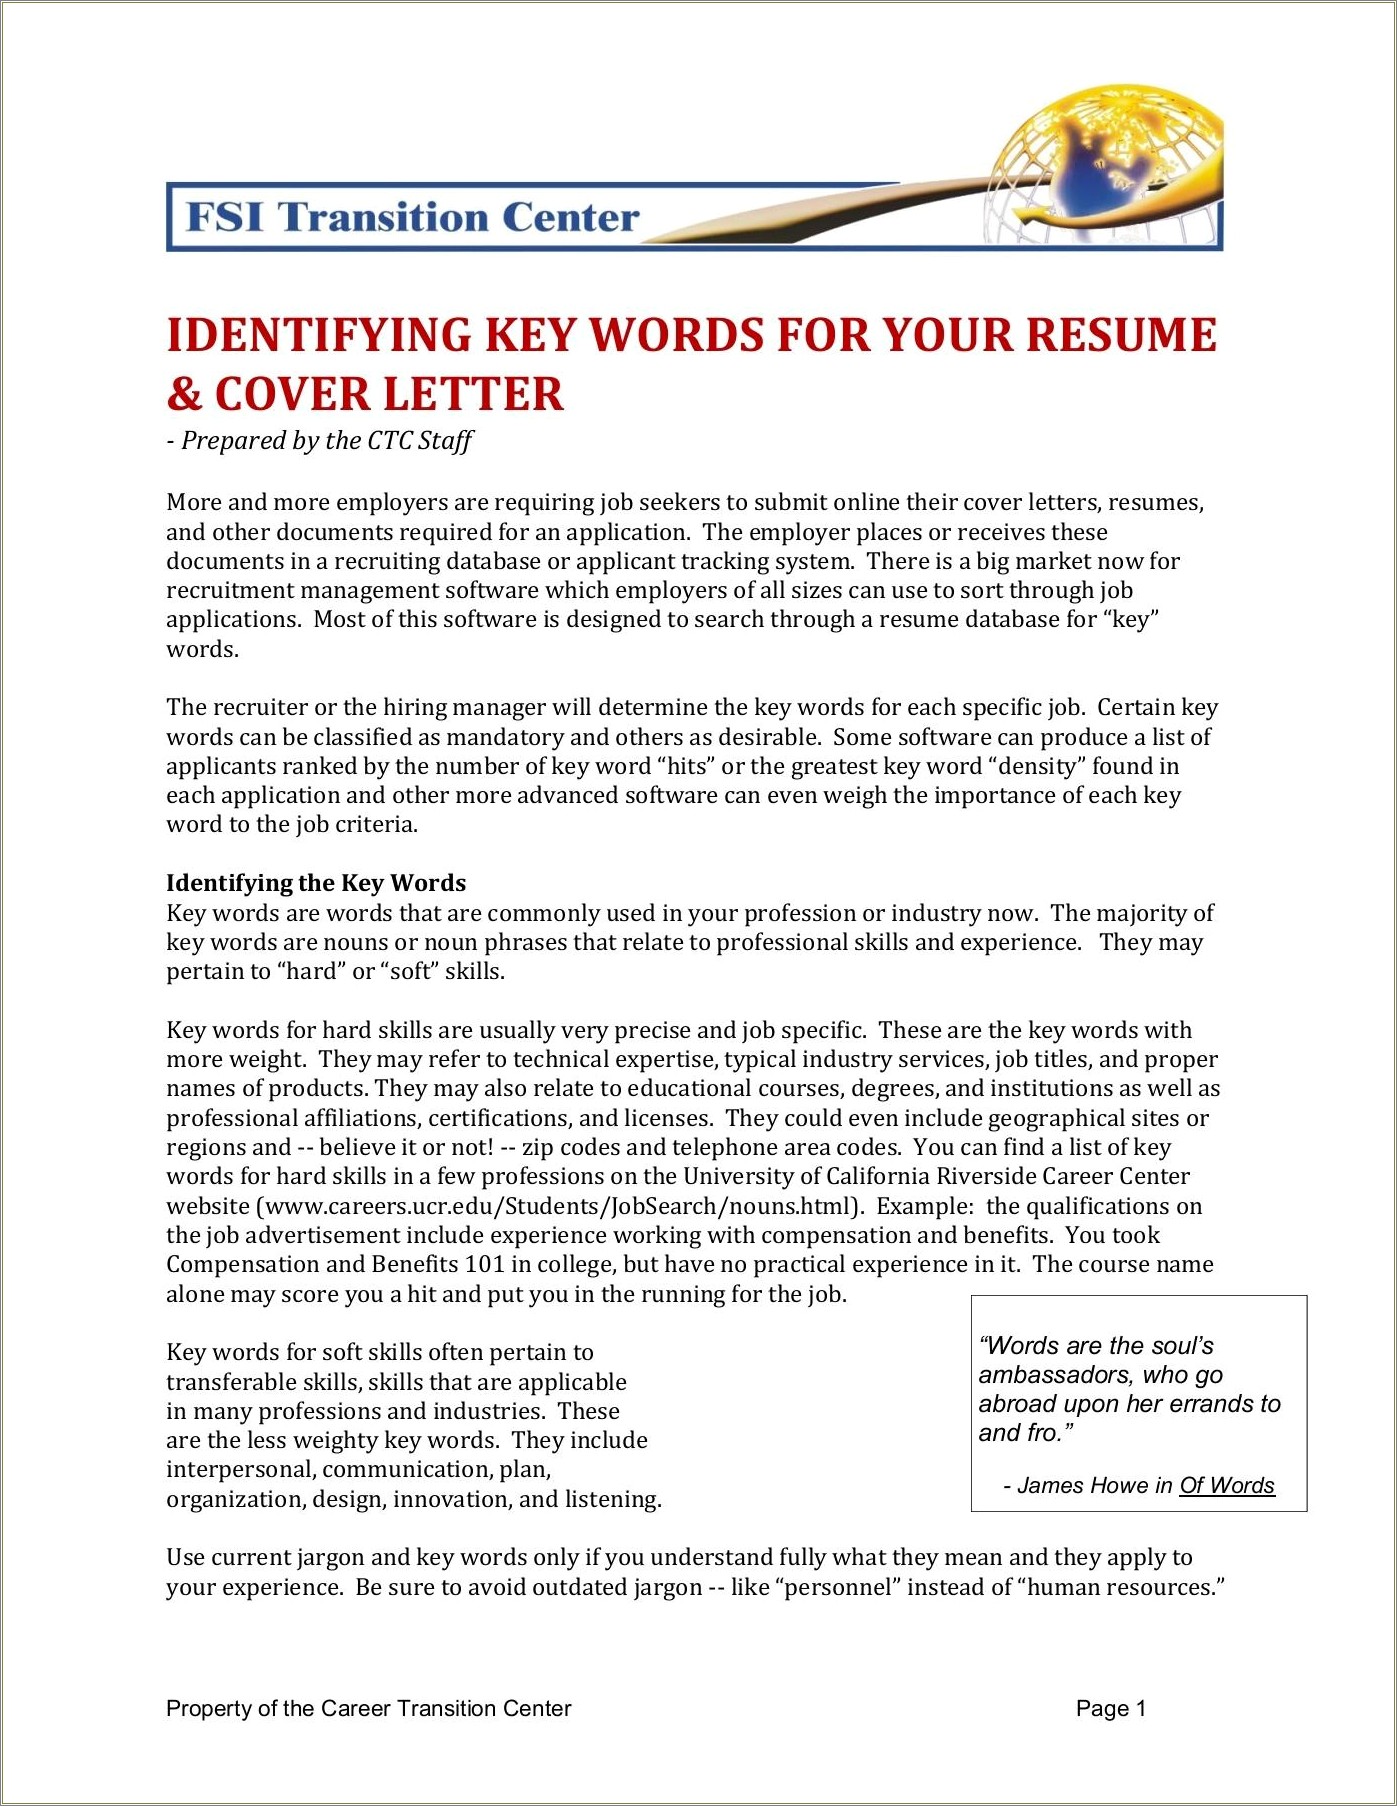 Keys Words To Use In A Resume